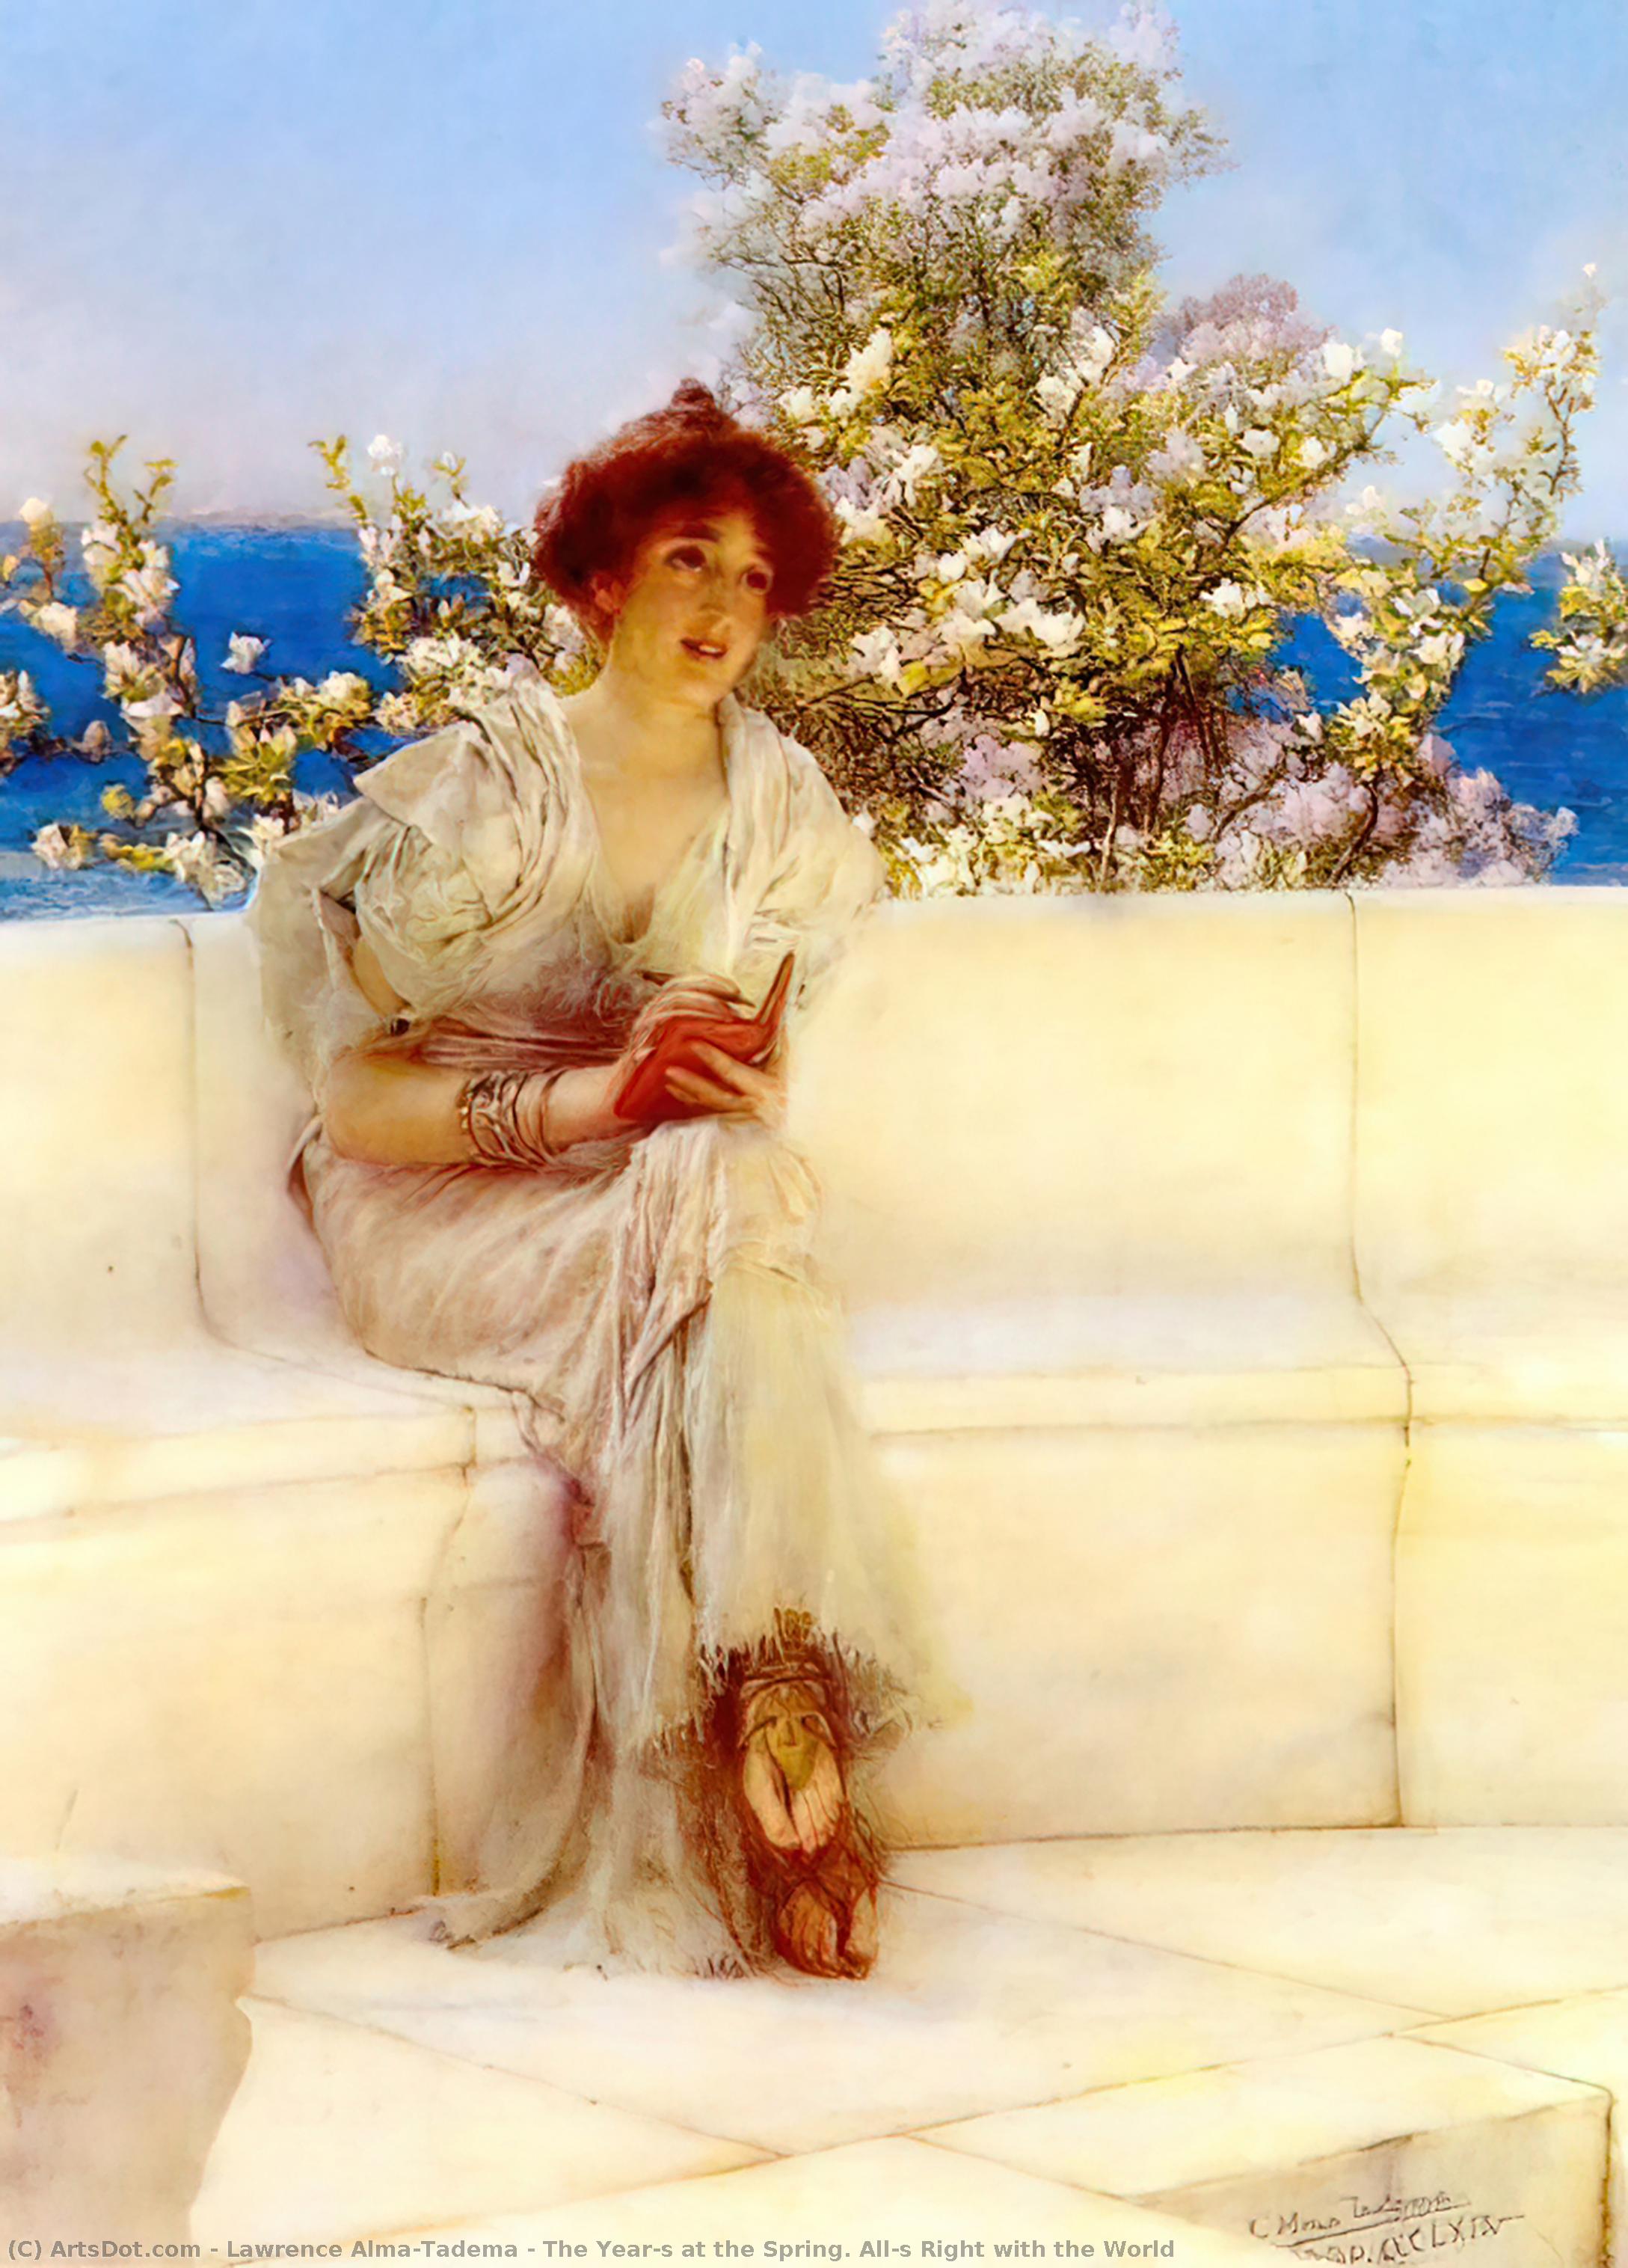 Buy Museum Art Reproductions The Year`s at the Spring. All`s Right with the World, 1902 by Lawrence Alma-Tadema | ArtsDot.com